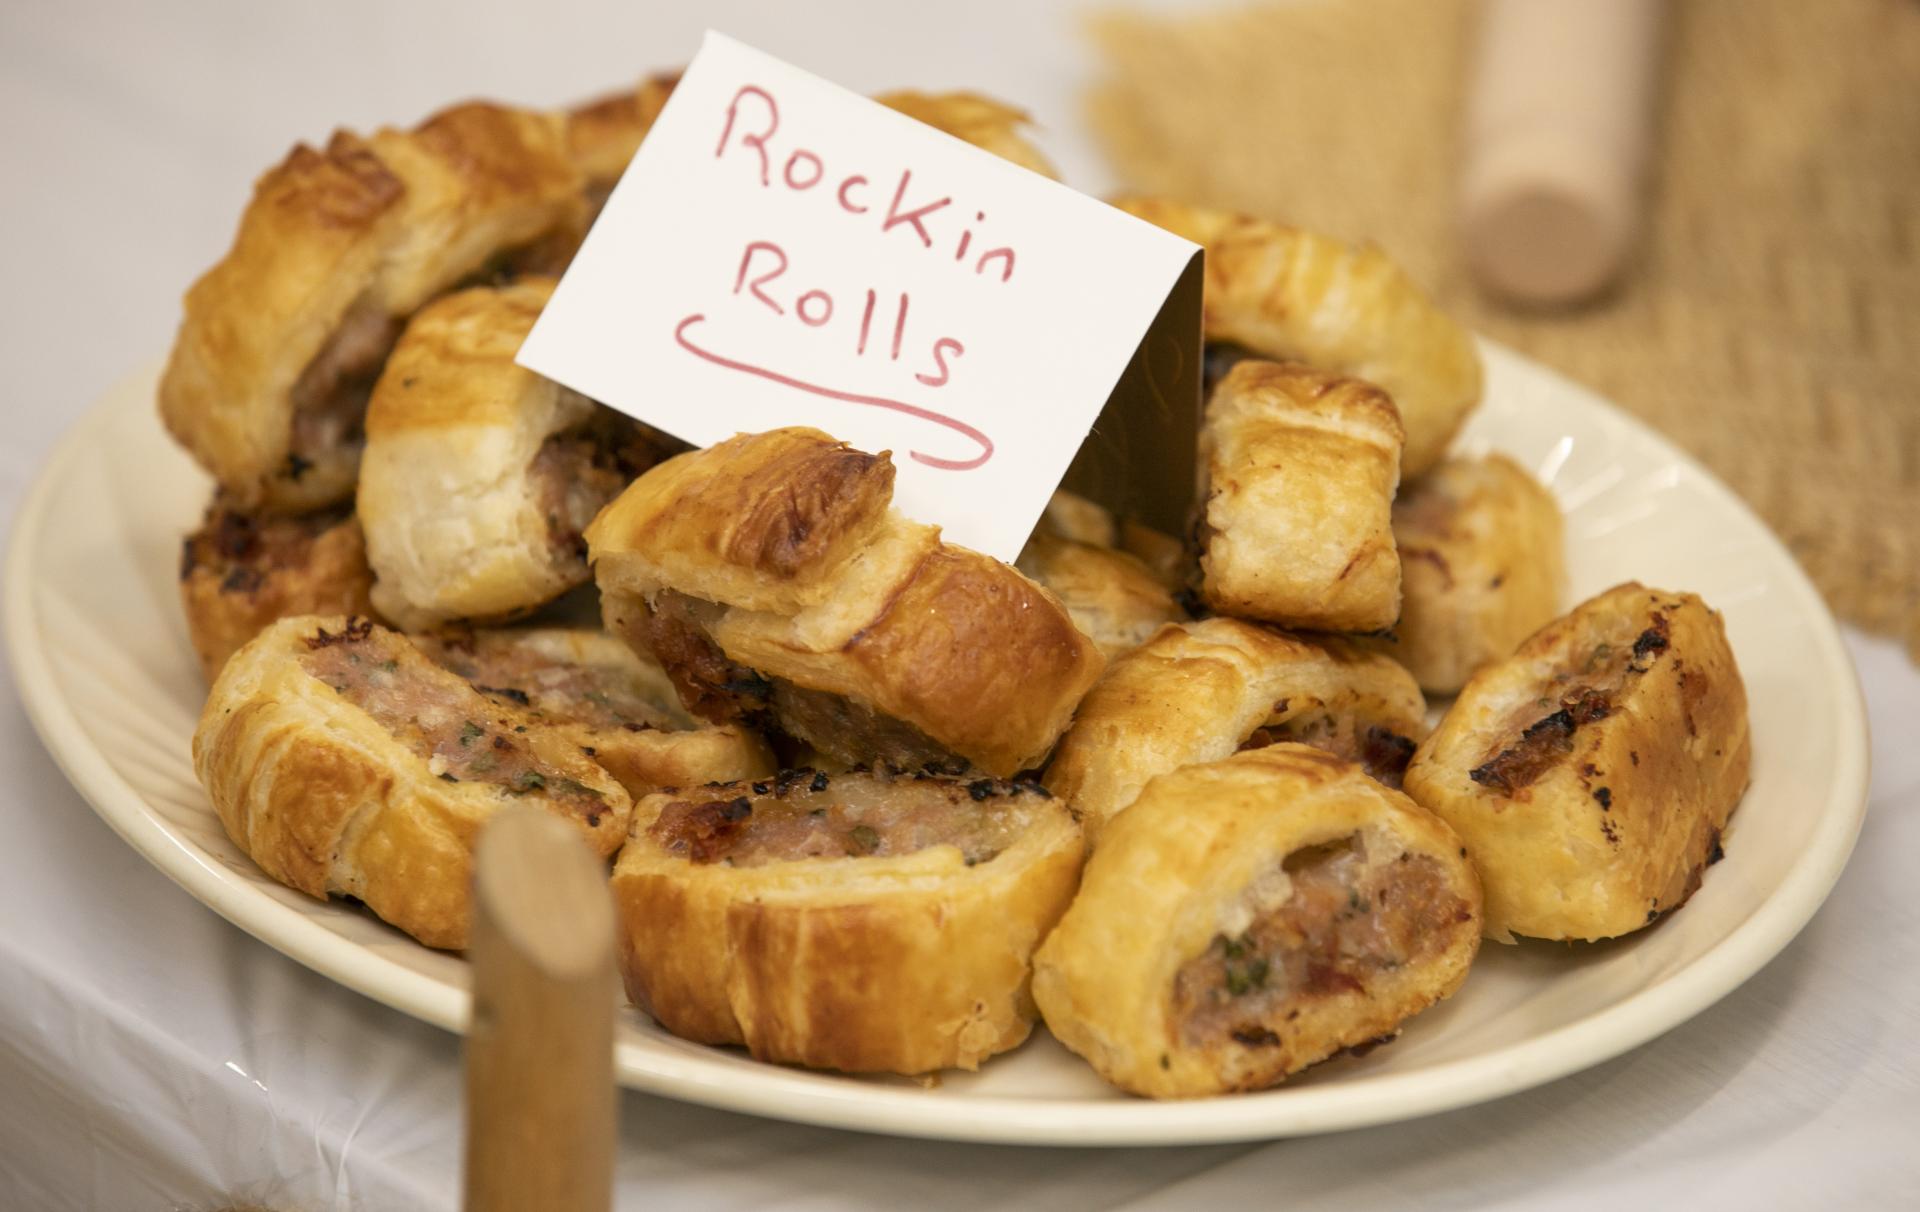 Shows Rockin' Rolls from the Wooden Spoons during DCU's Bake off for Barretstown